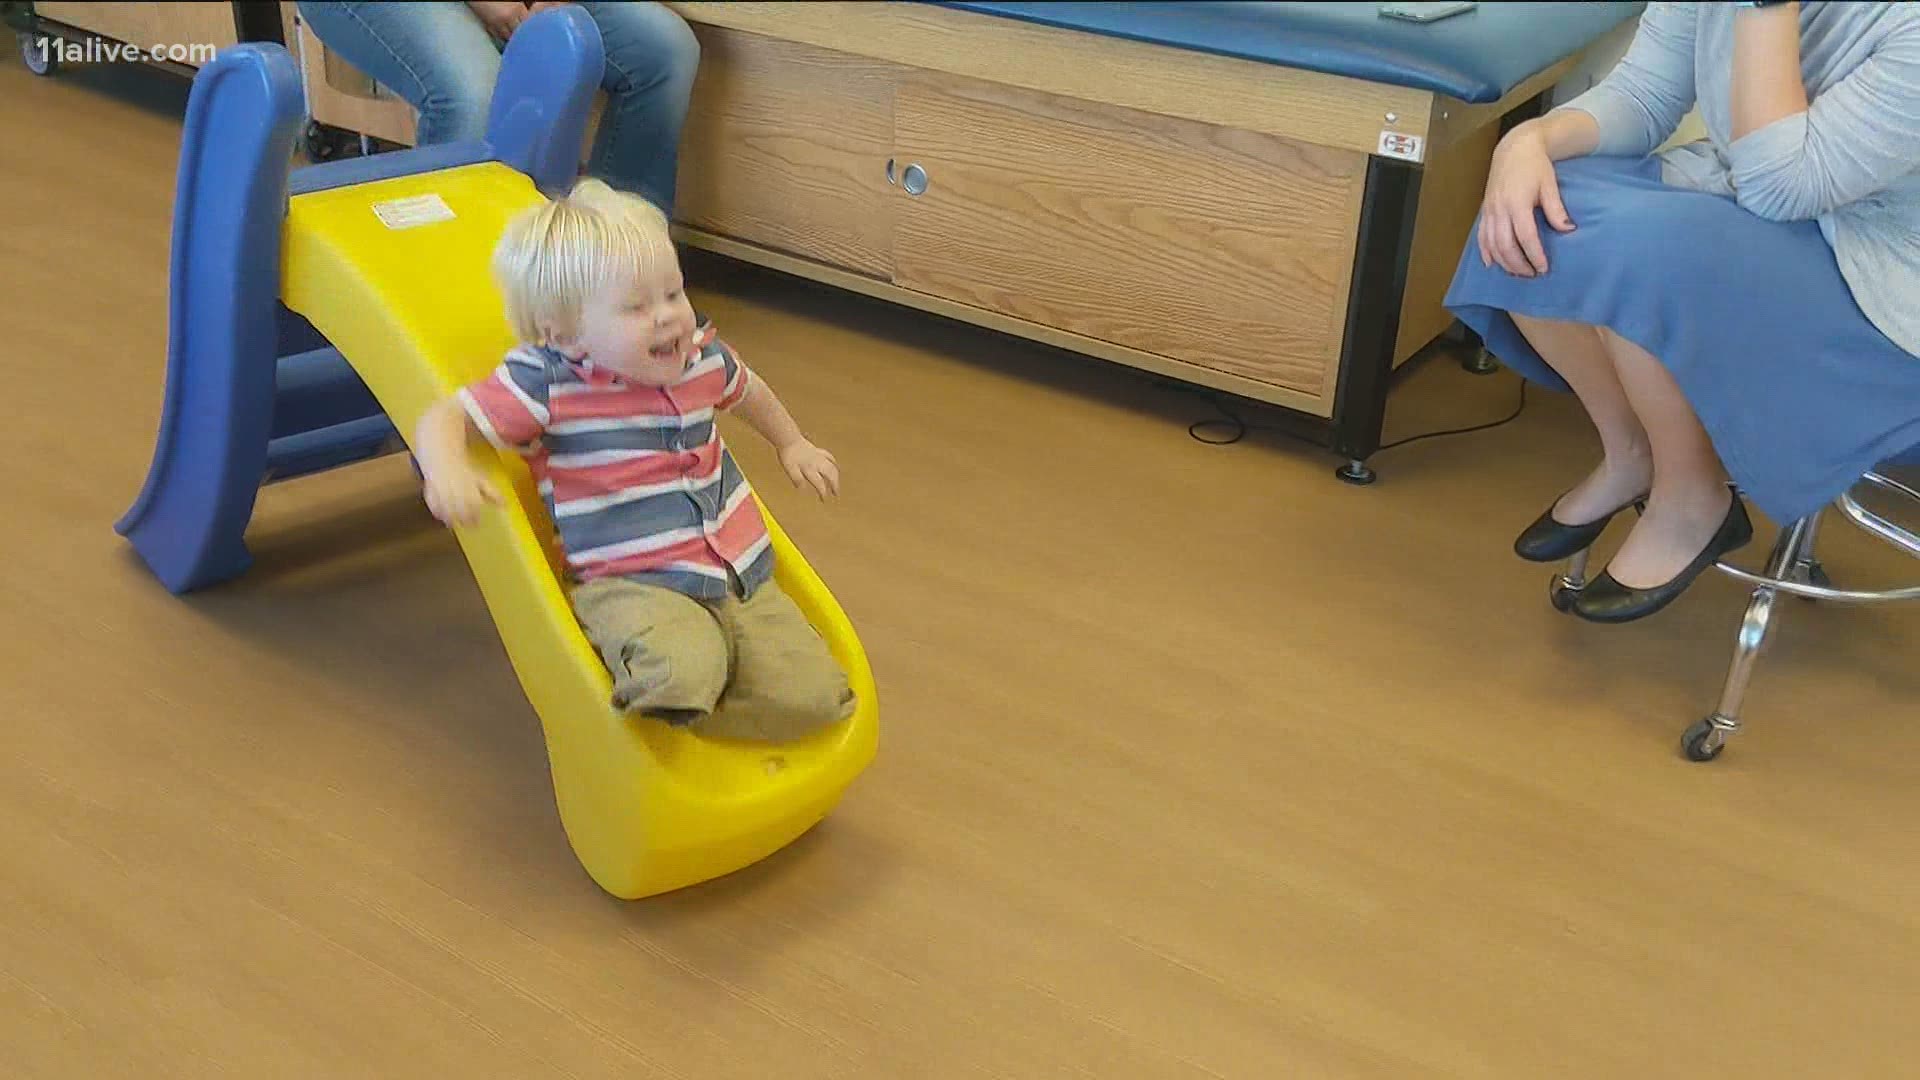 Now that Milo is 2, he was just fitted for his new prosthetic legs, which will help him run around and jump and play.